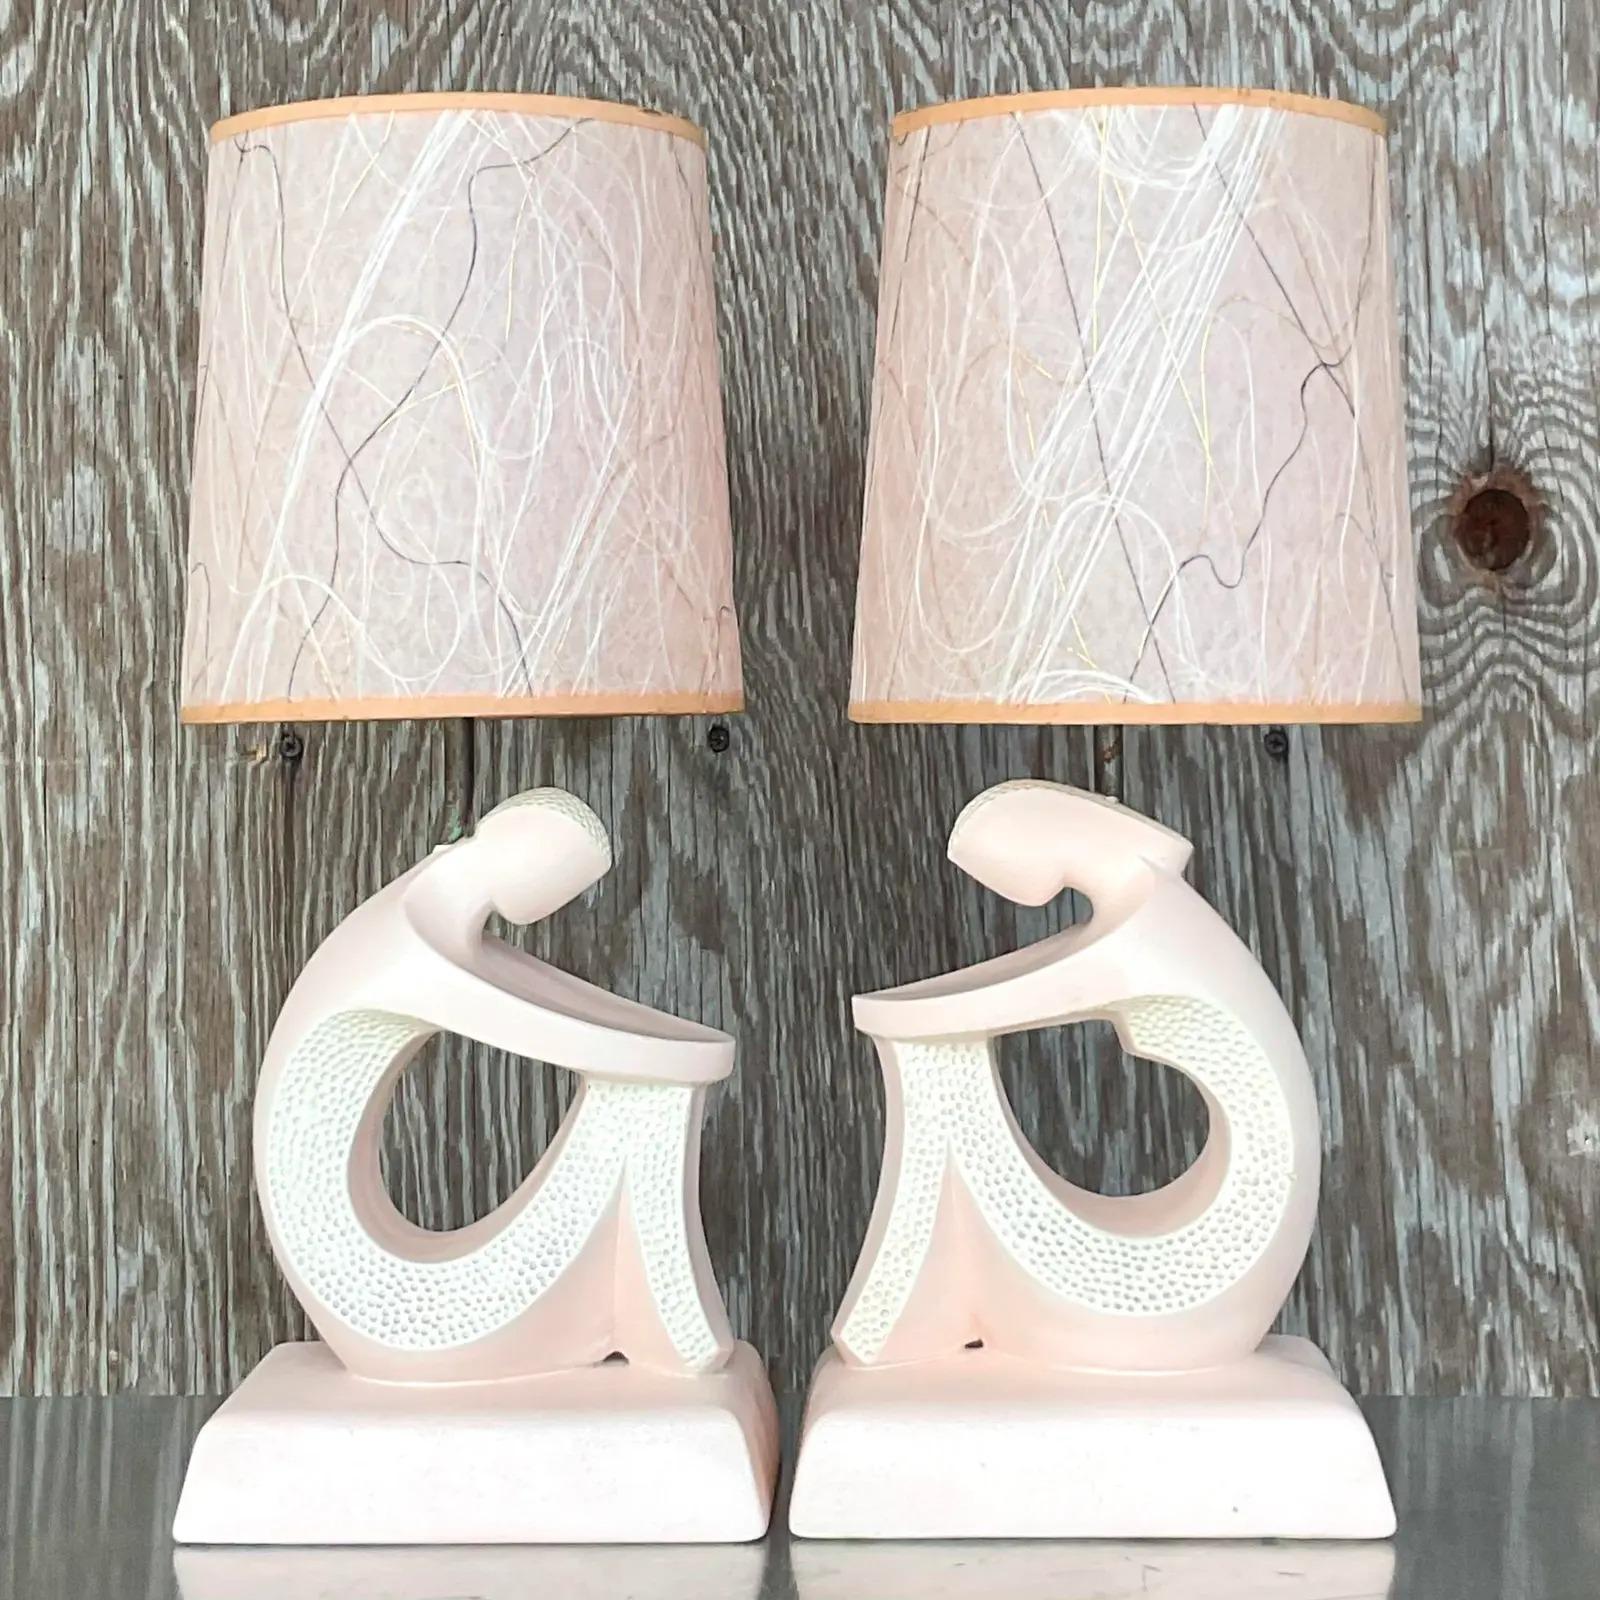 North American Vintage MCM 1950s Frederick Weinberg Sculptural Figure Lamps - a Pair For Sale